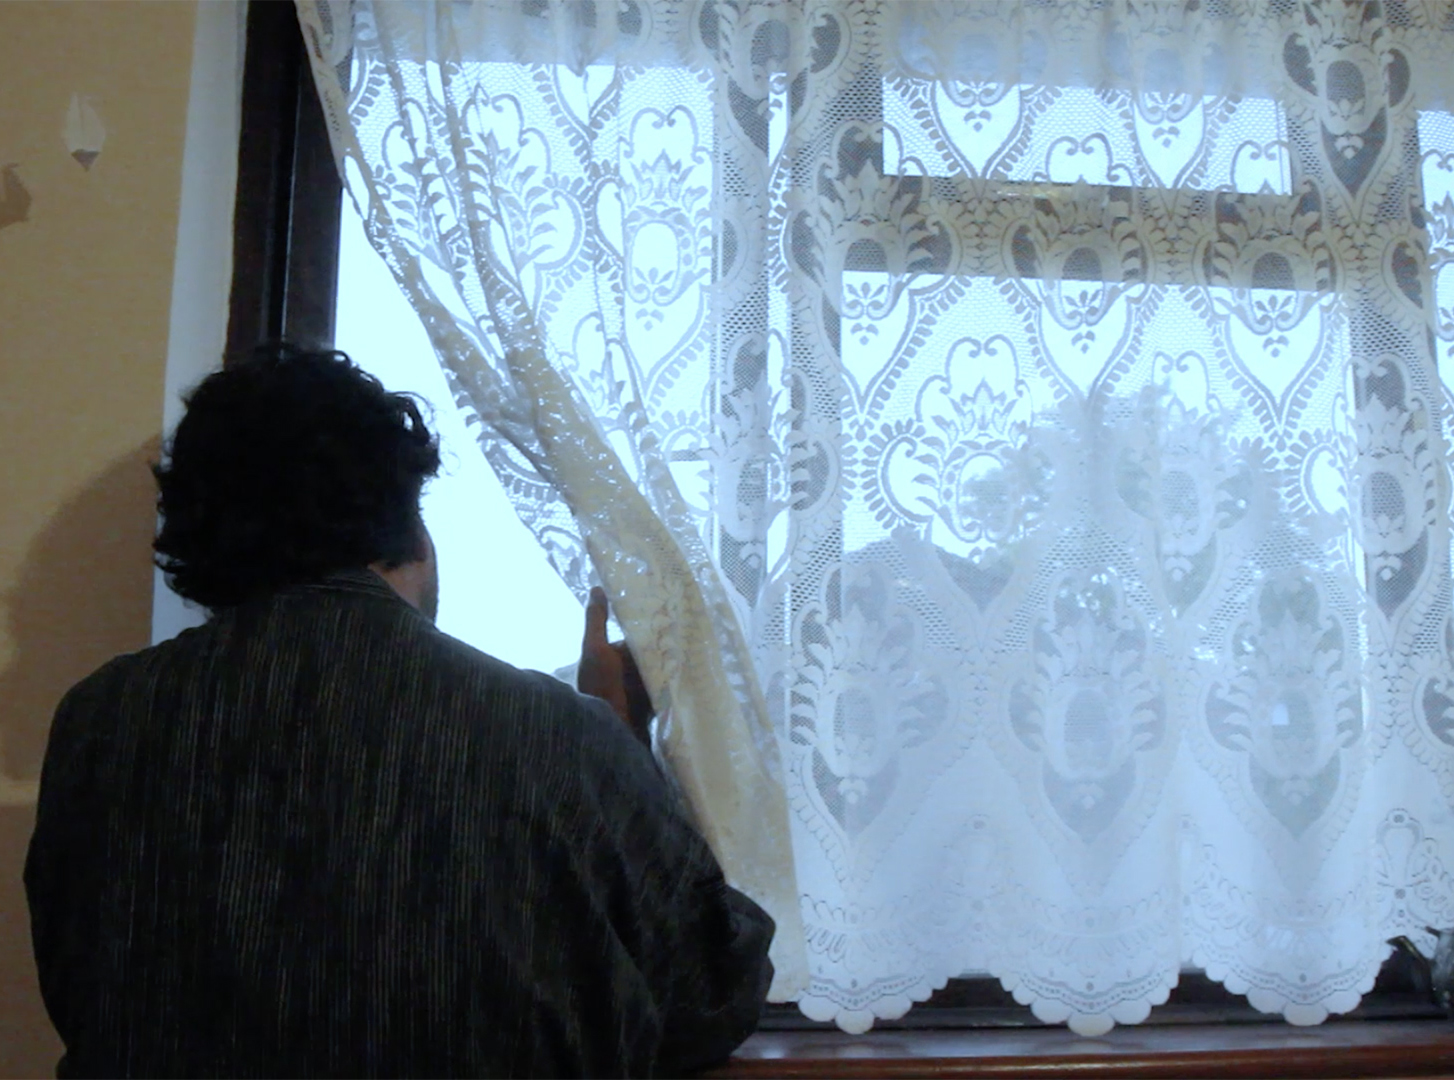 A person seen from behind, peering through a lace curtain to look out of a window